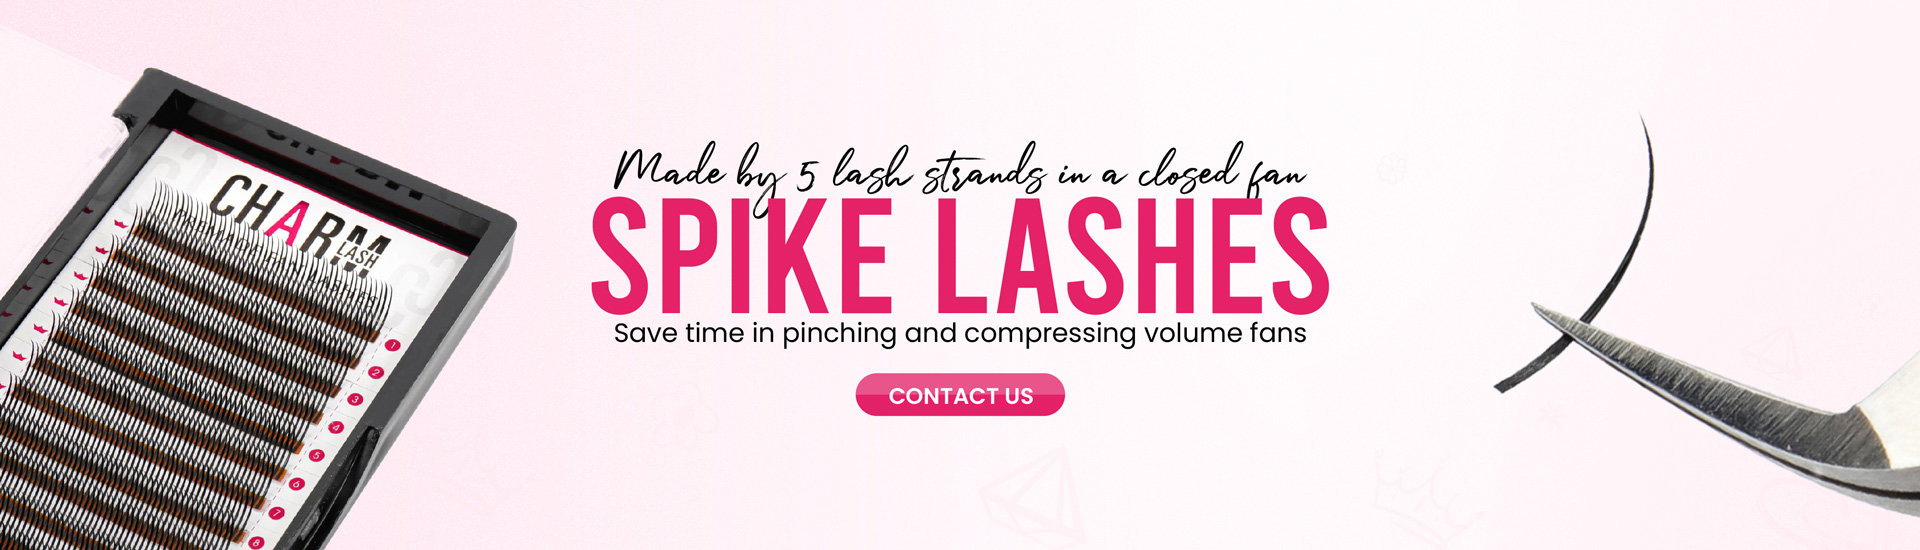 spike lashes